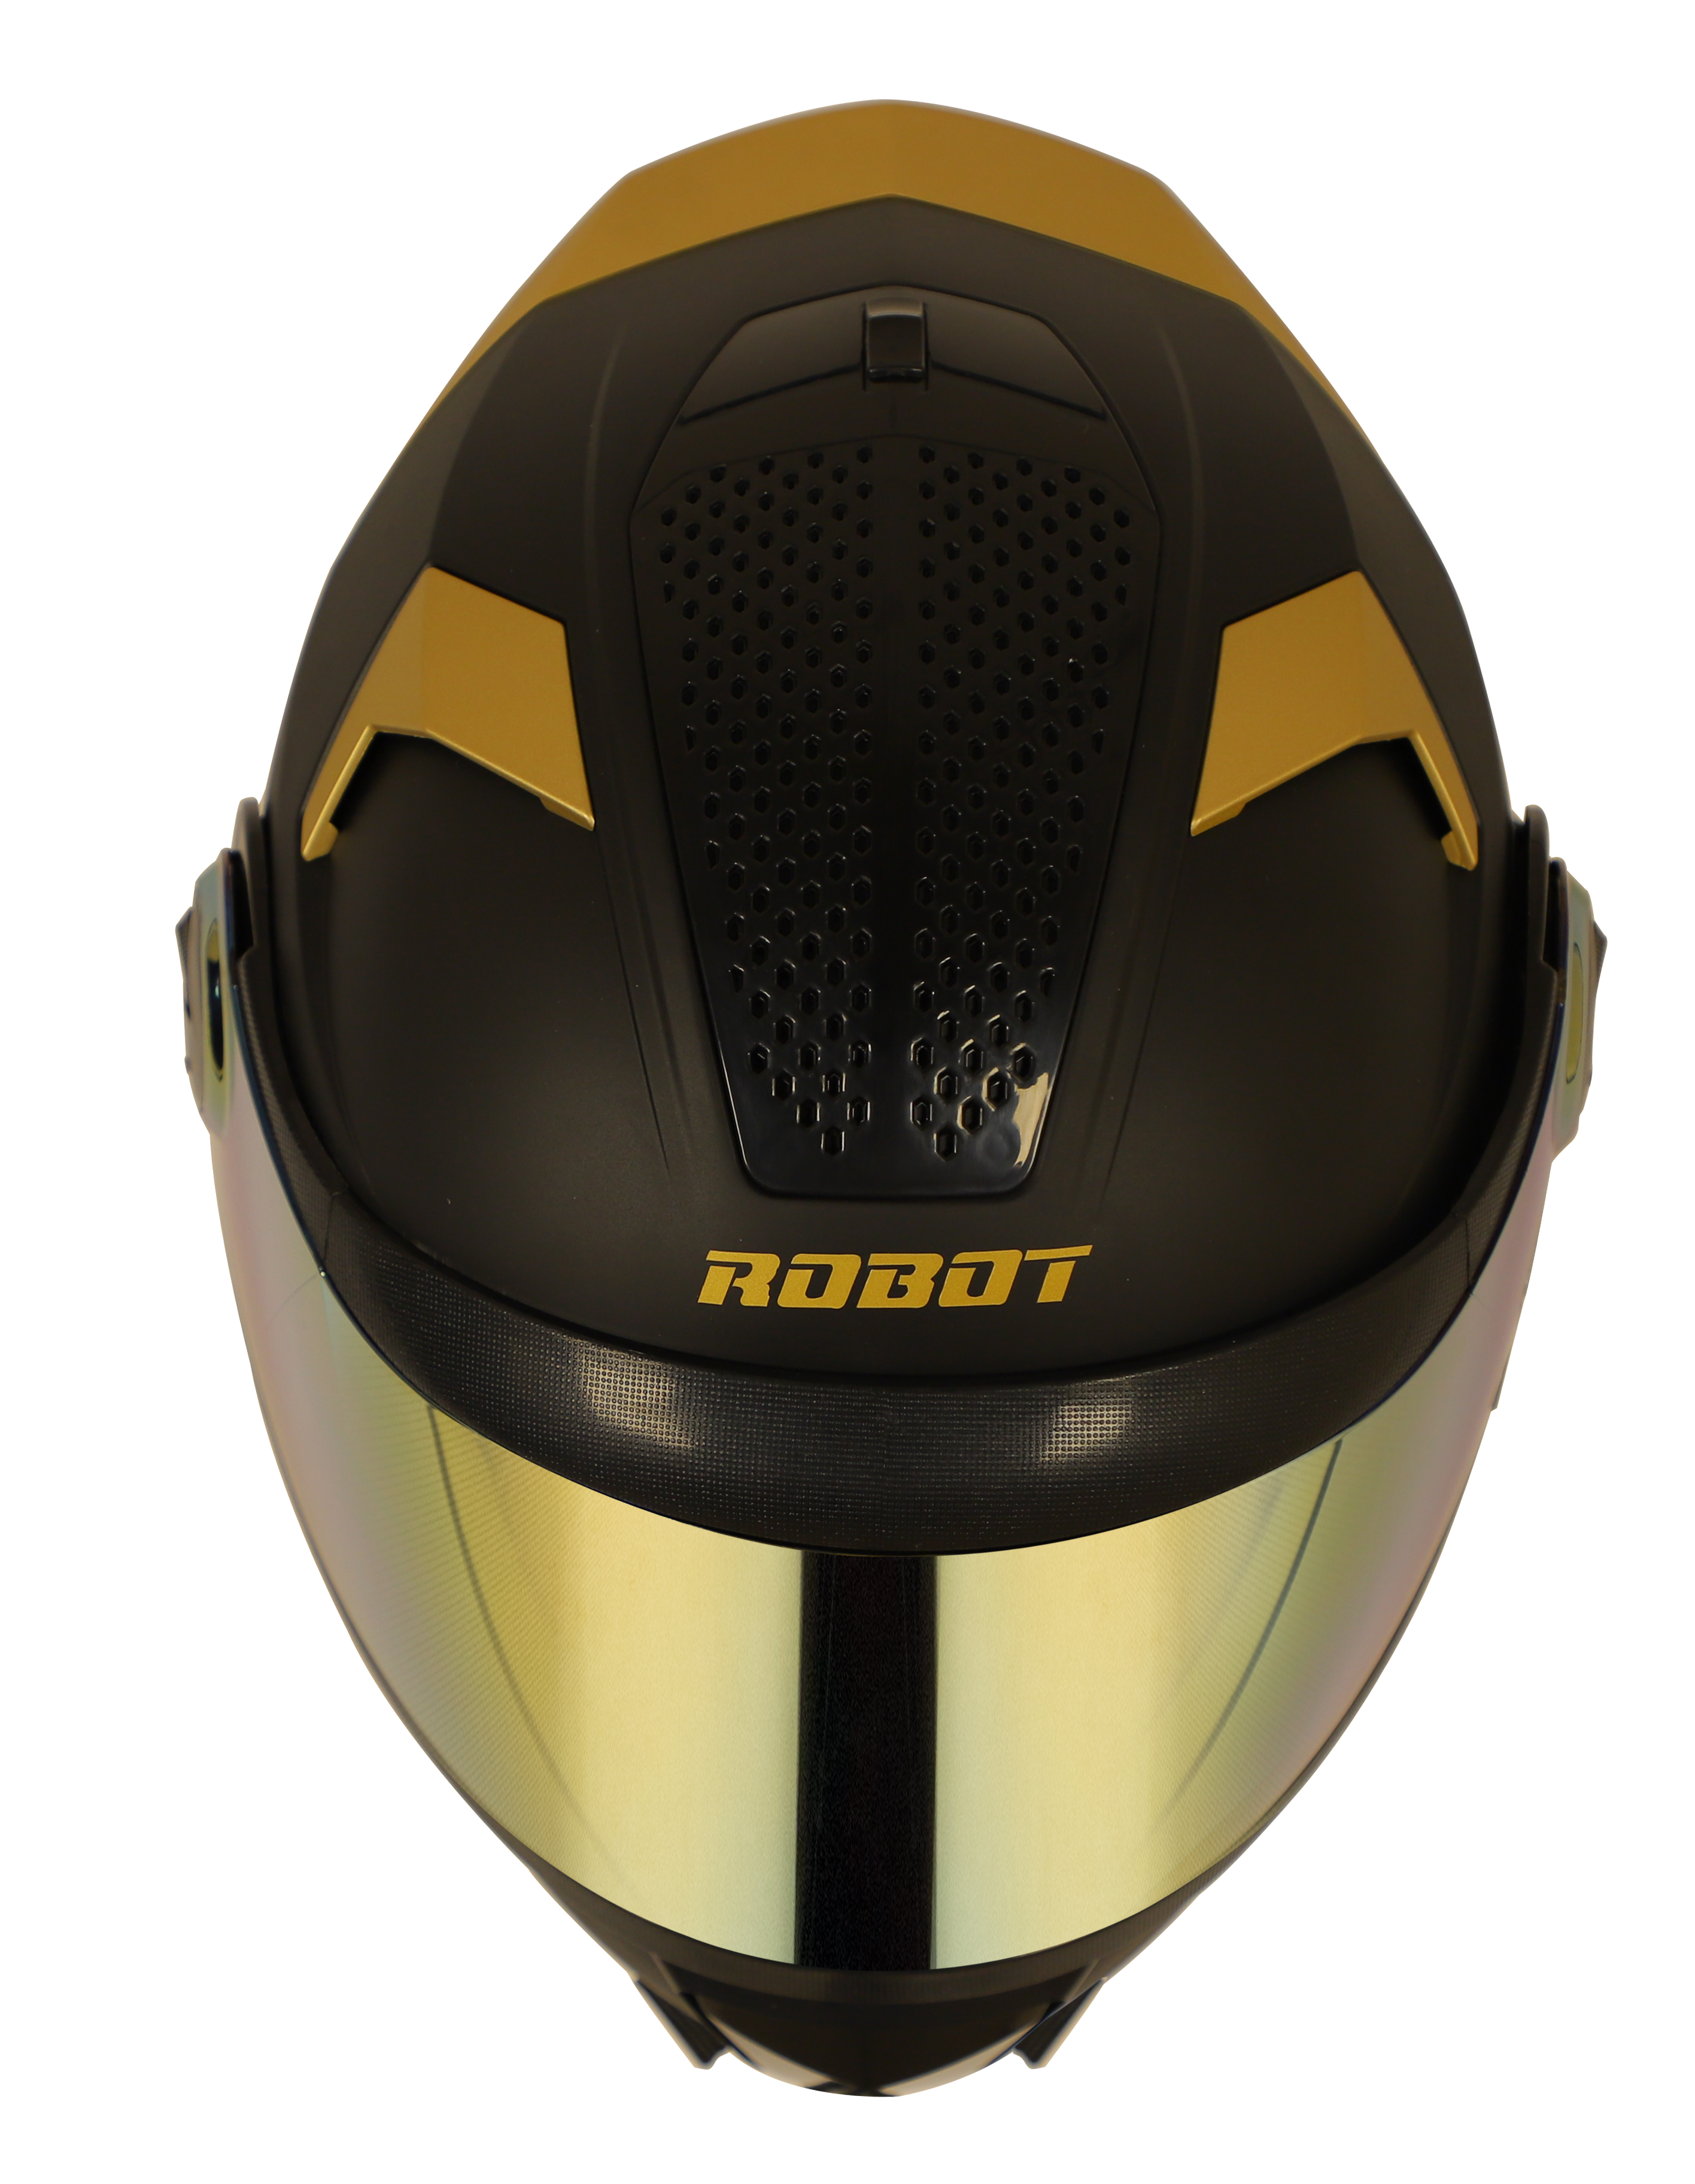 SBH-17 ROBOT GOLD EDITION ( FITTED WITH CLEAR VISOR EXTRA GOLD CHROME VISOR FREE)